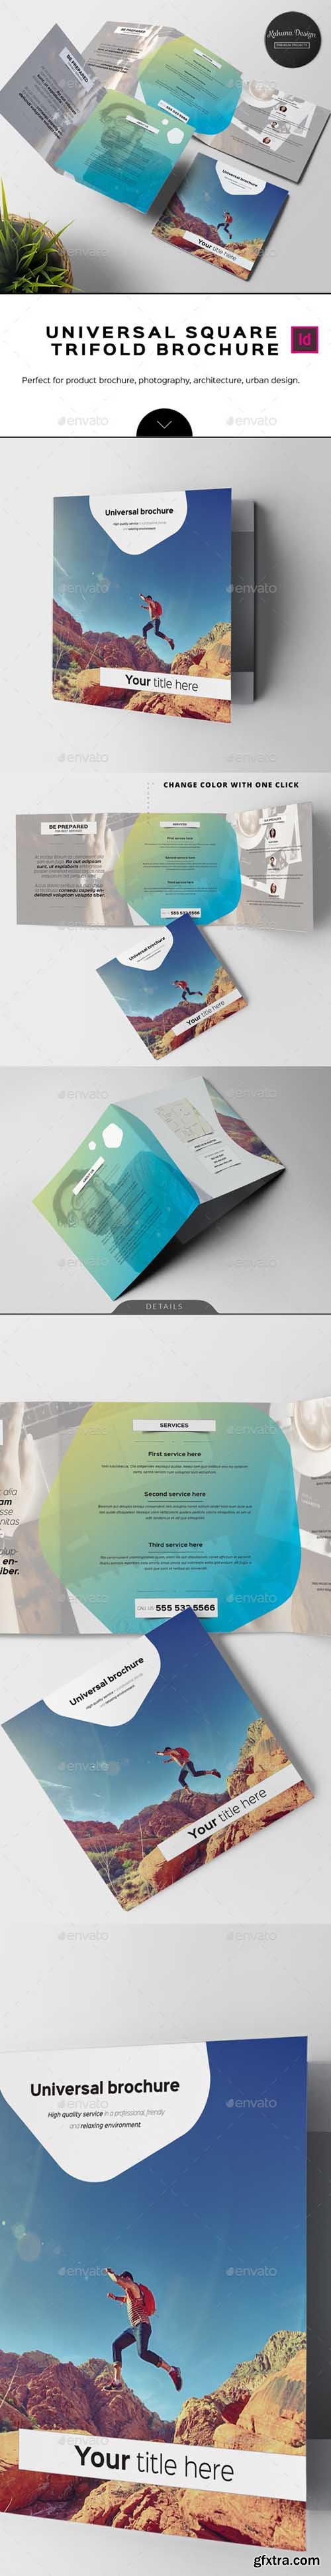 GR - Universal Square Trifold Brochure 17455020